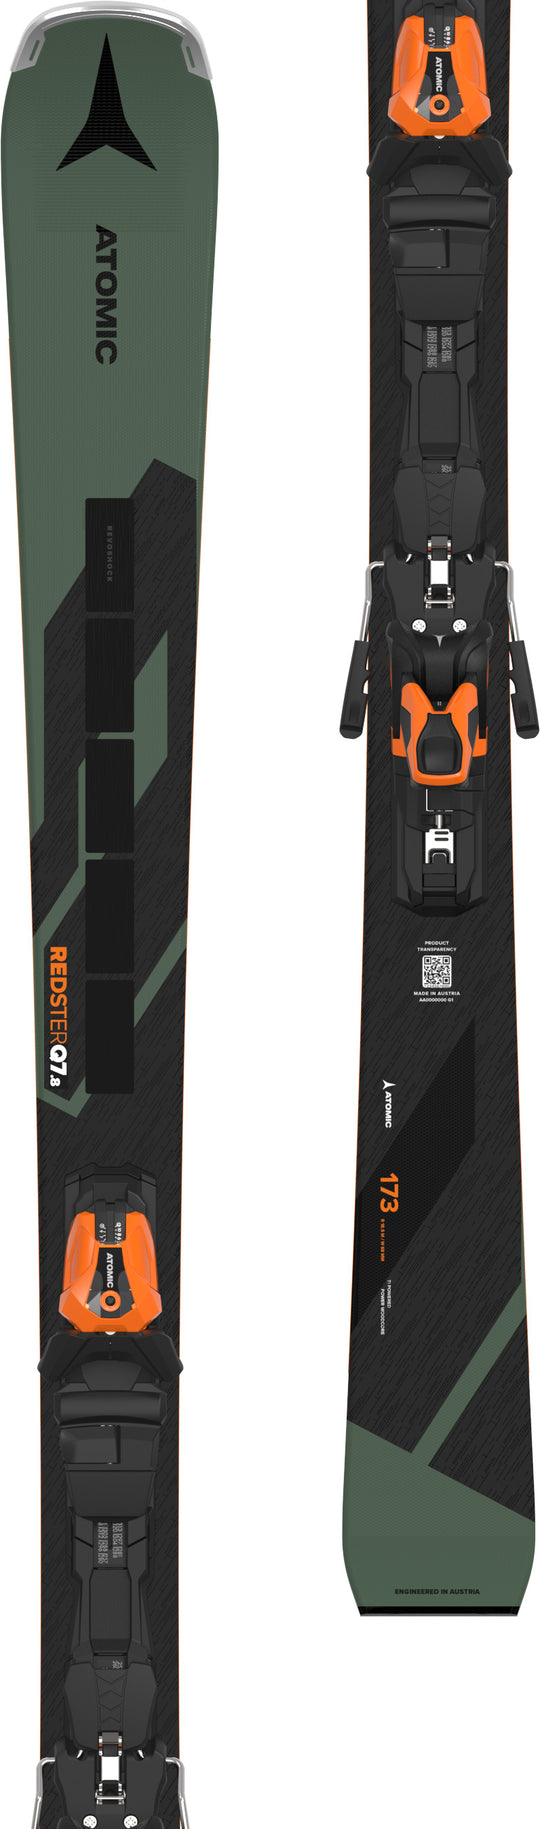 All Skis – Atomic New Zealand